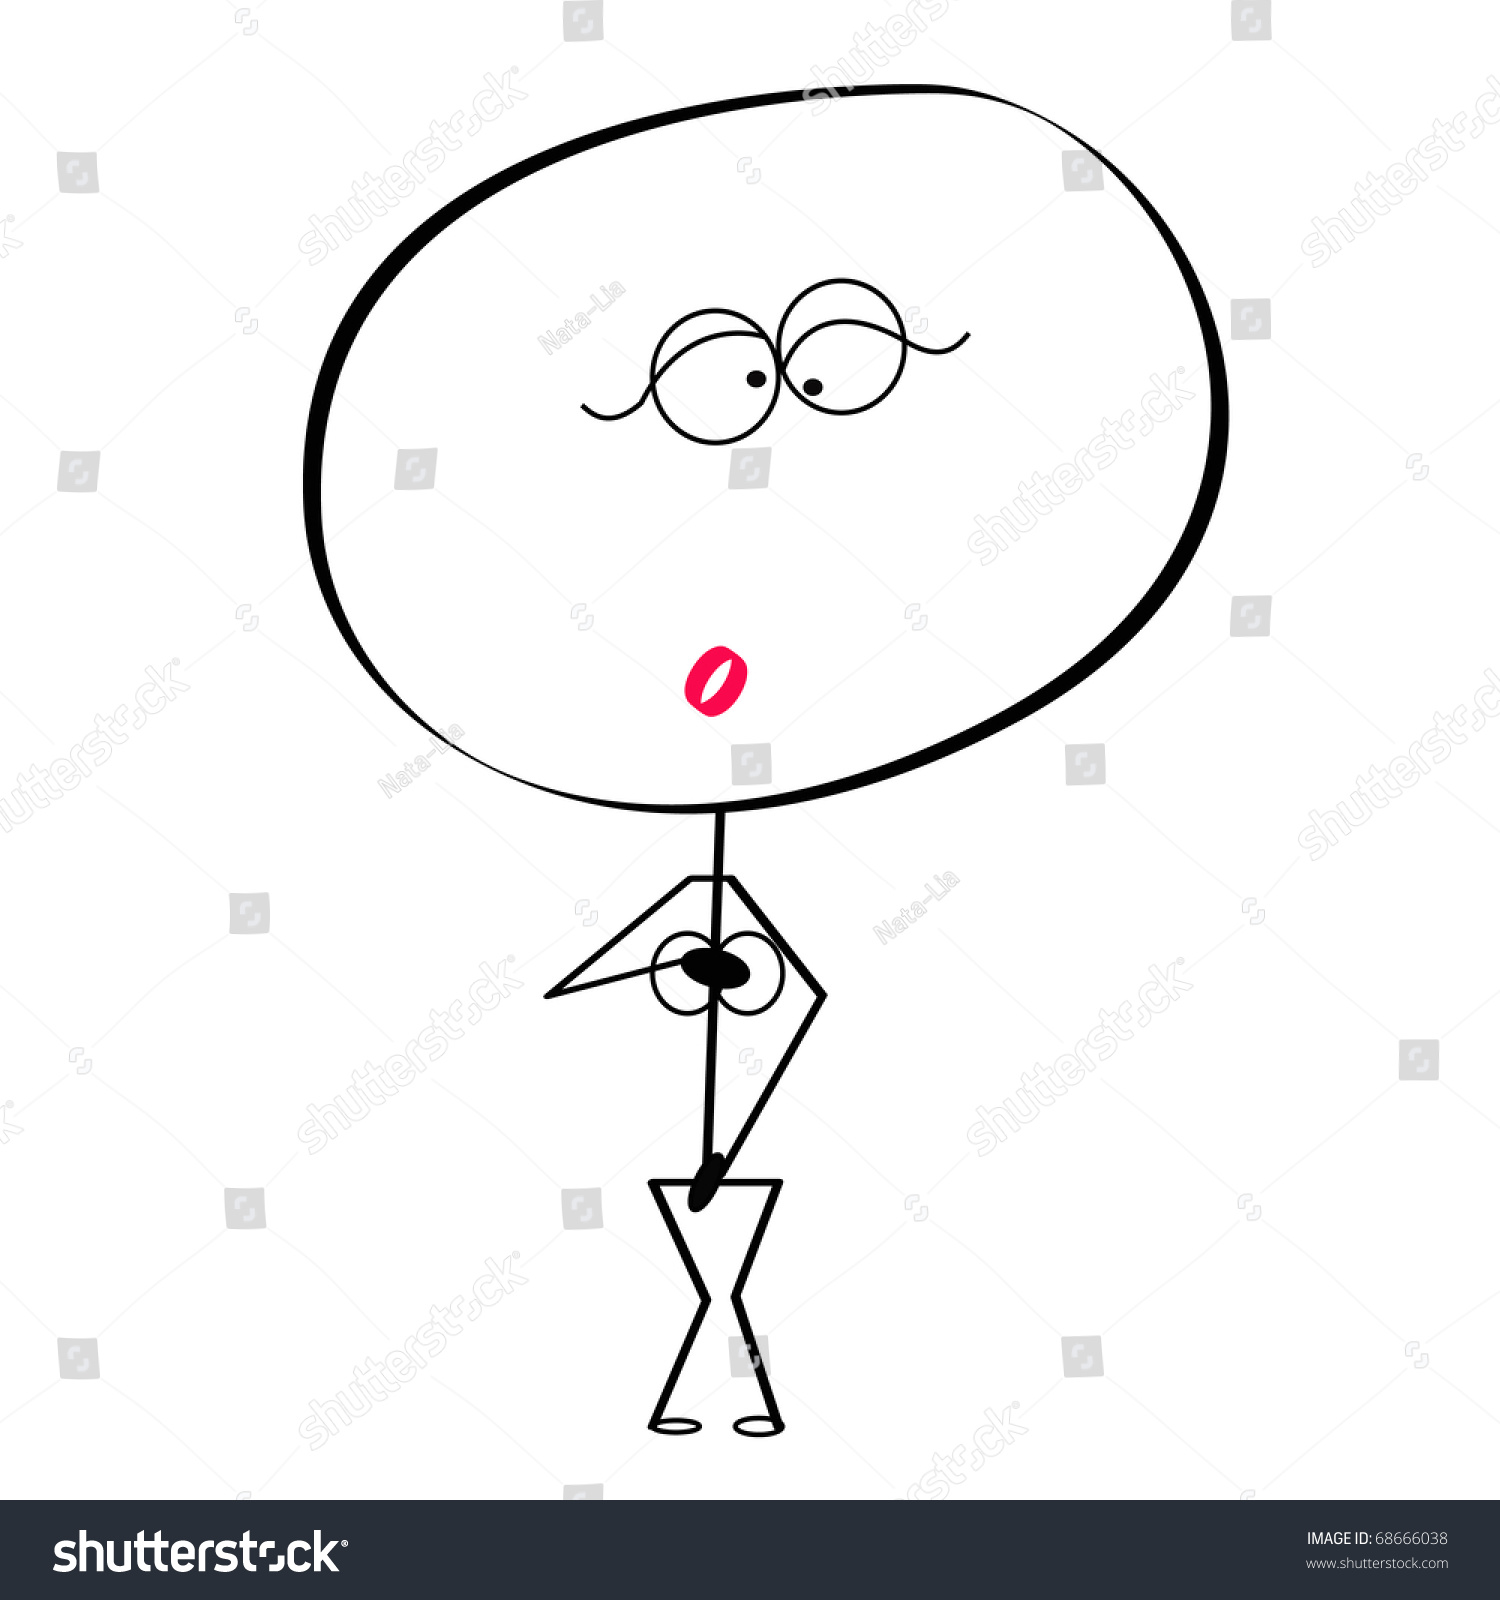 Vector Cartoon Nude Woman Silhouette Isolated Stock Vector Royalty Free 68666038 Shutterstock 